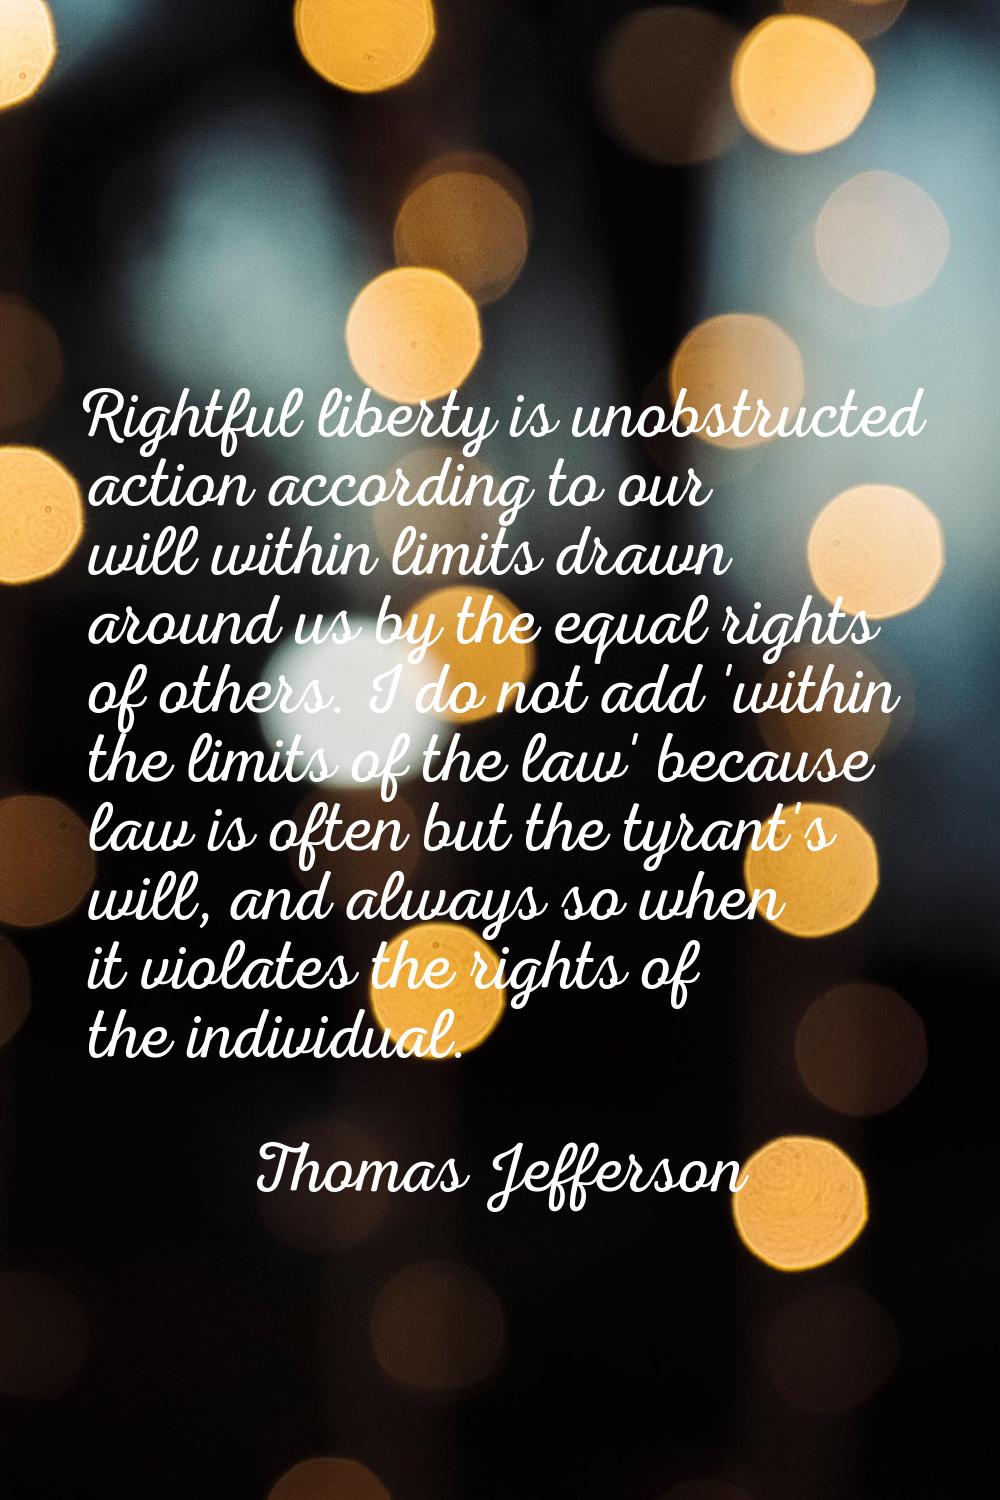 Rightful liberty is unobstructed action according to our will within limits drawn around us by the 